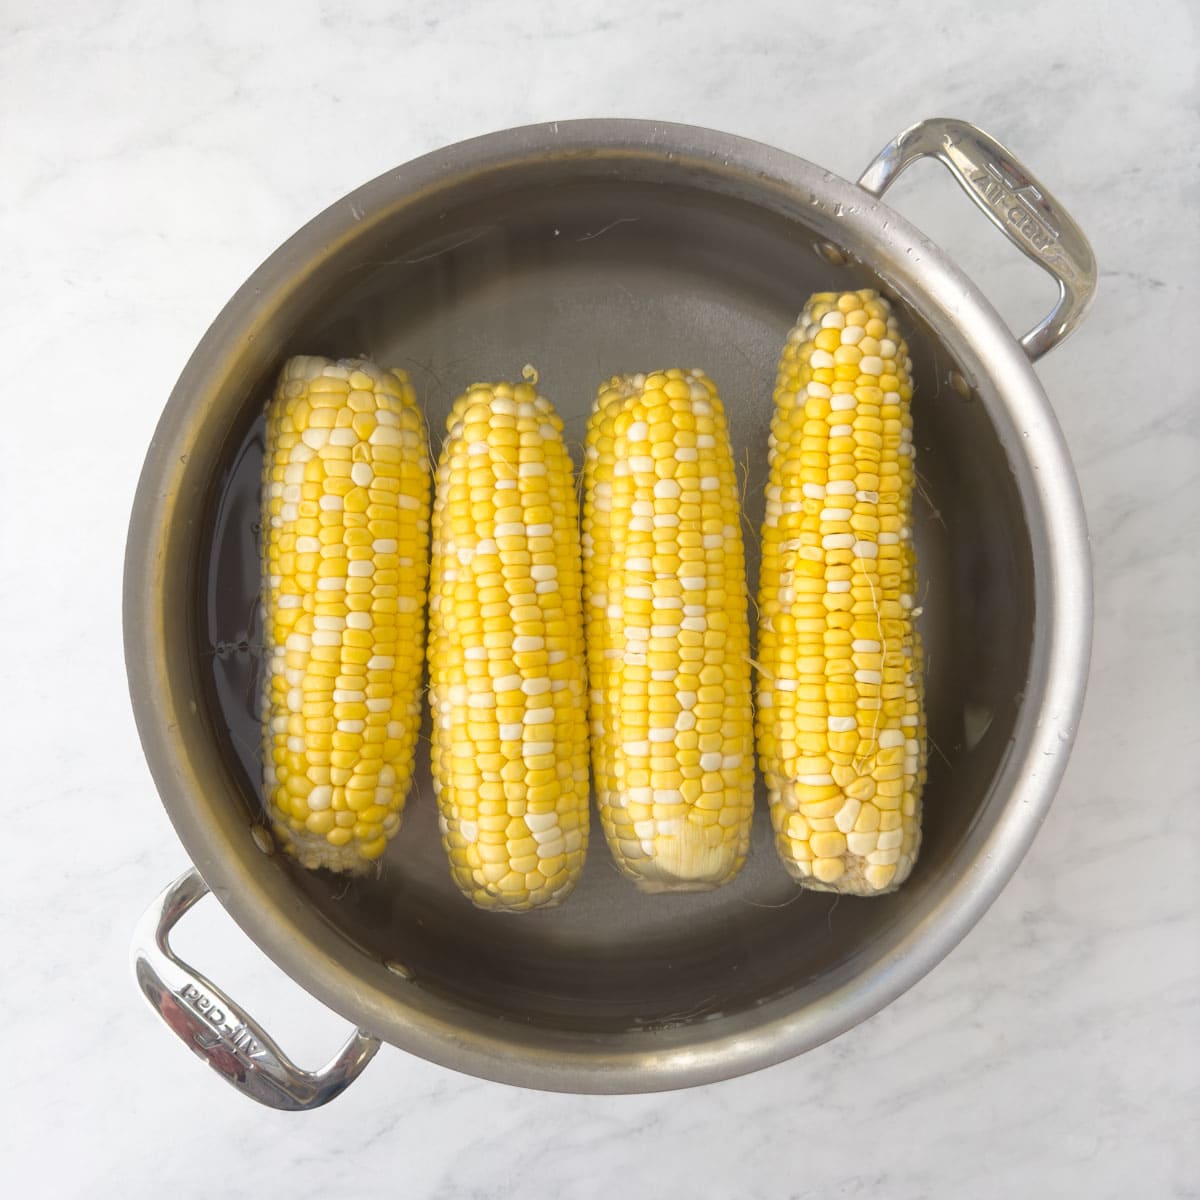 Cooking yellow corn on the cob in a pot of boiling water.